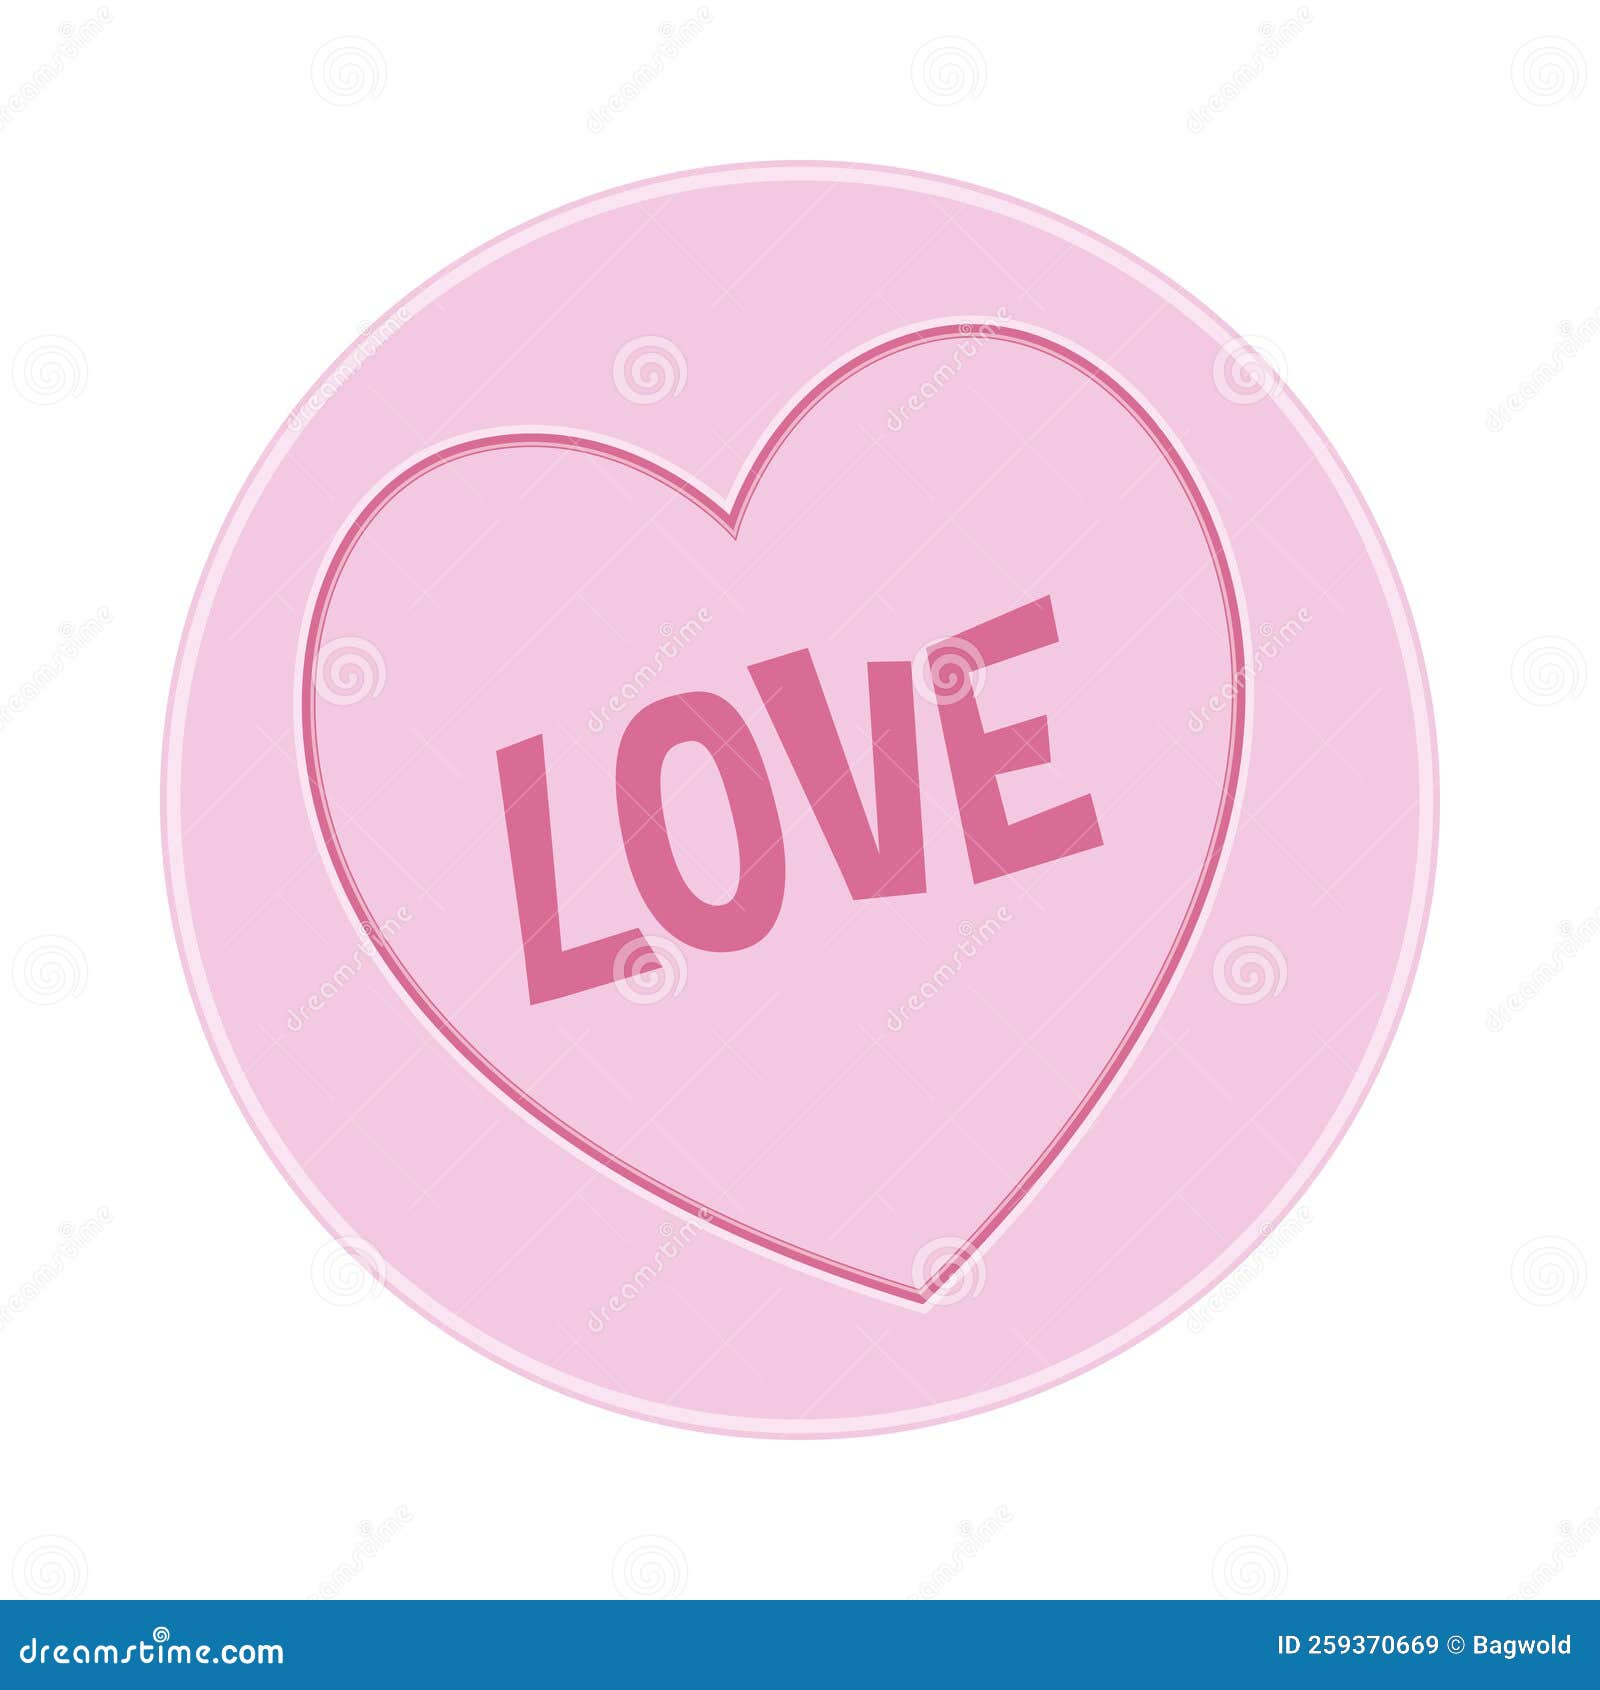 loveheart sweet candy - love message  